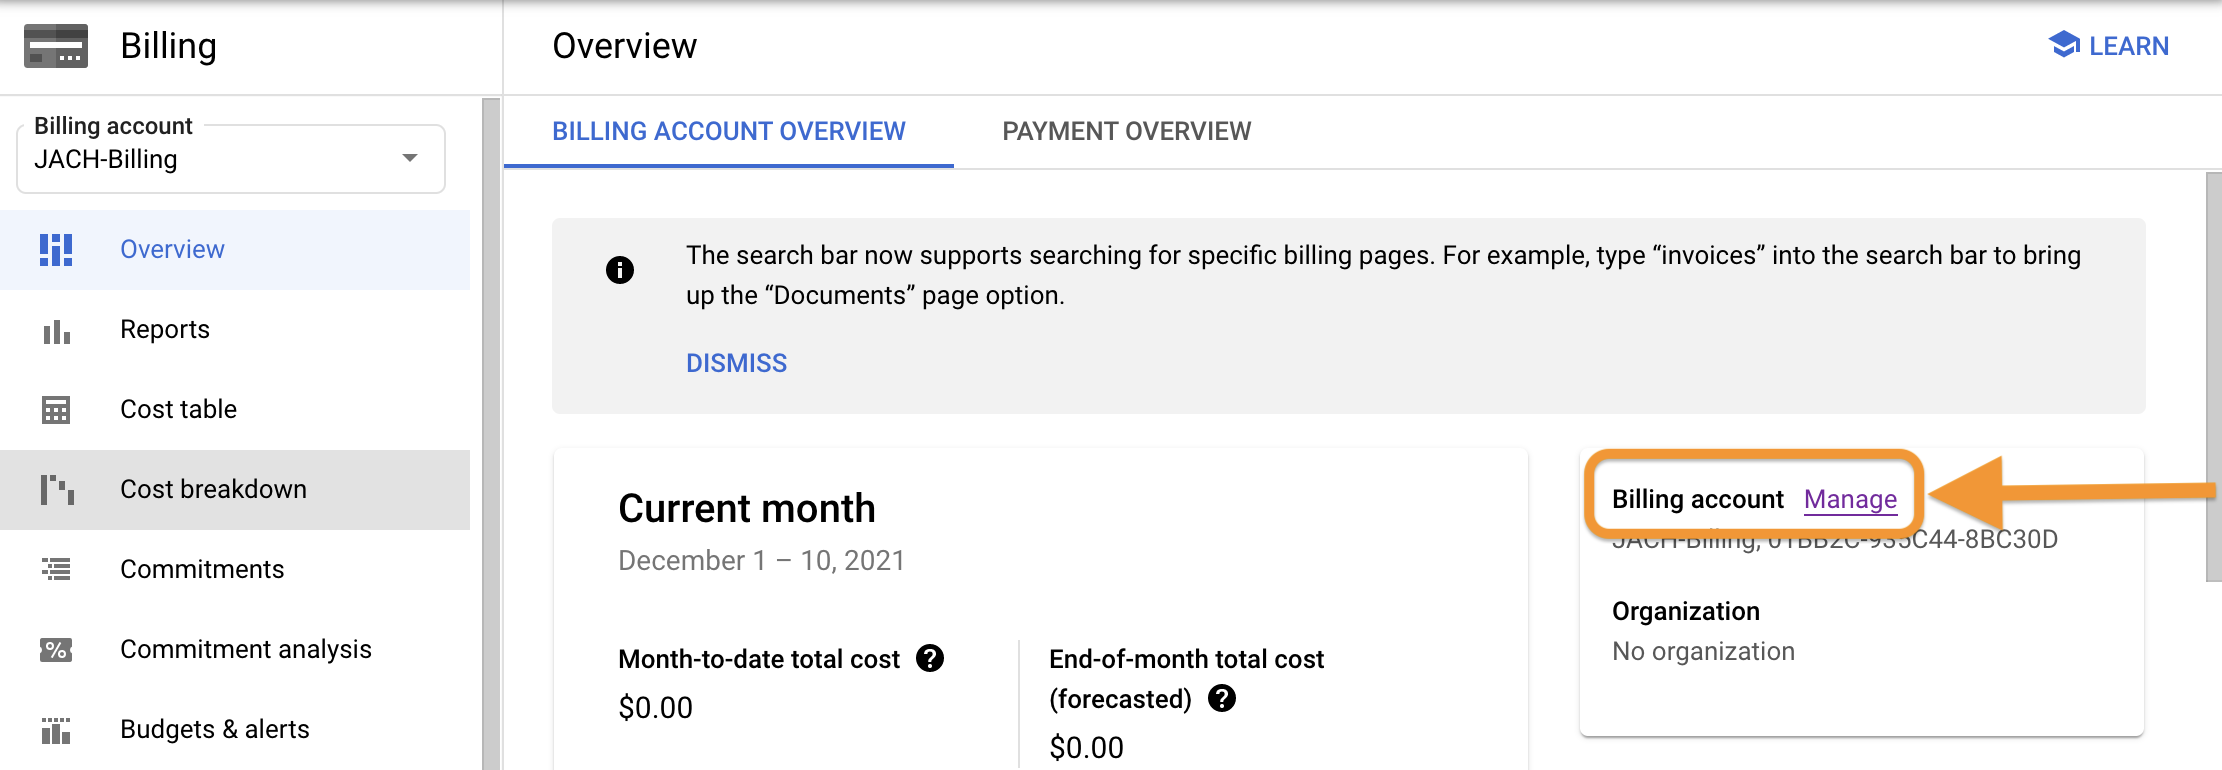 Screenshot of Billing page for Google Cloud account 'JAC-Billing' with arrow pointing to 'Billing account: Manage' link in right hand column